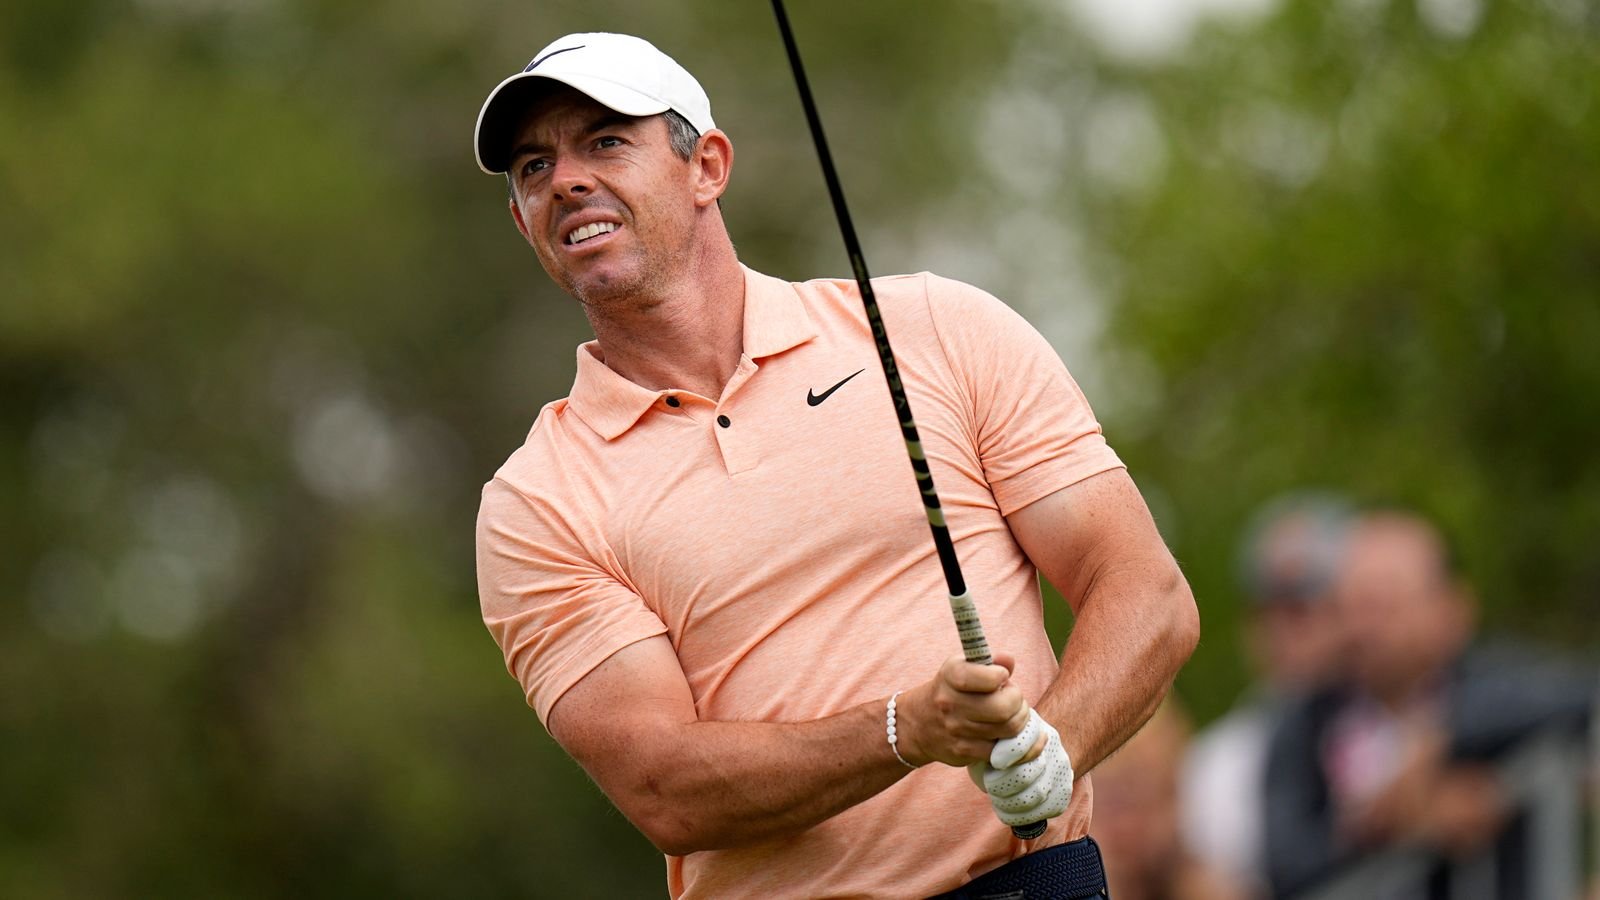 The Masters: How is Rory McIlroy shaping up as he bids to complete Grand Slam at Augusta National? | Golf News